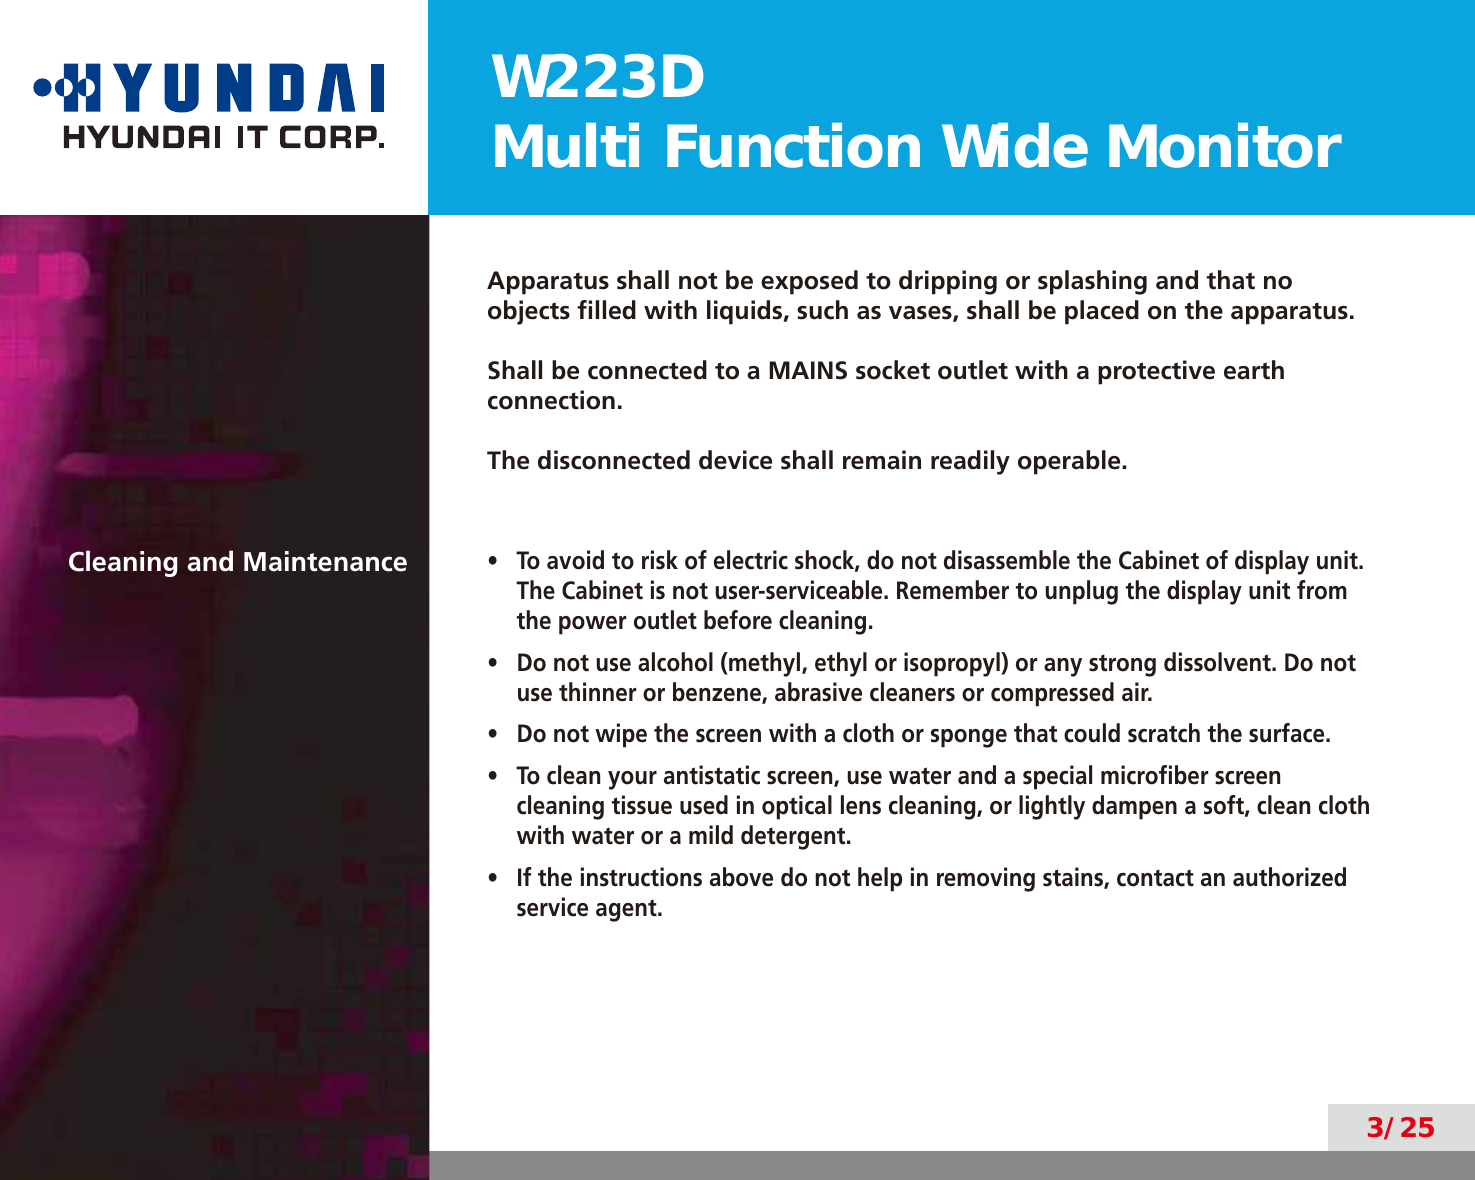 W223DMulti Function Wide Monitor3/25Apparatus shall not be exposed to dripping or splashing and that no objects ﬁlled with liquids, such as vases, shall be placed on the apparatus.Shall be connected to a MAINS socket outlet with a protective earth connection.The disconnected device shall remain readily operable.Cleaning and Maintenance•  To avoid to risk of electric shock, do not disassemble the Cabinet of display unit. The Cabinet is not user-serviceable. Remember to unplug the display unit from the power outlet before cleaning.•  Do not use alcohol (methyl, ethyl or isopropyl) or any strong dissolvent. Do not use thinner or benzene, abrasive cleaners or compressed air.•  Do not wipe the screen with a cloth or sponge that could scratch the surface.•  To clean your antistatic screen, use water and a special microﬁber screen cleaning tissue used in optical lens cleaning, or lightly dampen a soft, clean cloth with water or a mild detergent.•  If the instructions above do not help in removing stains, contact an authorized service agent.